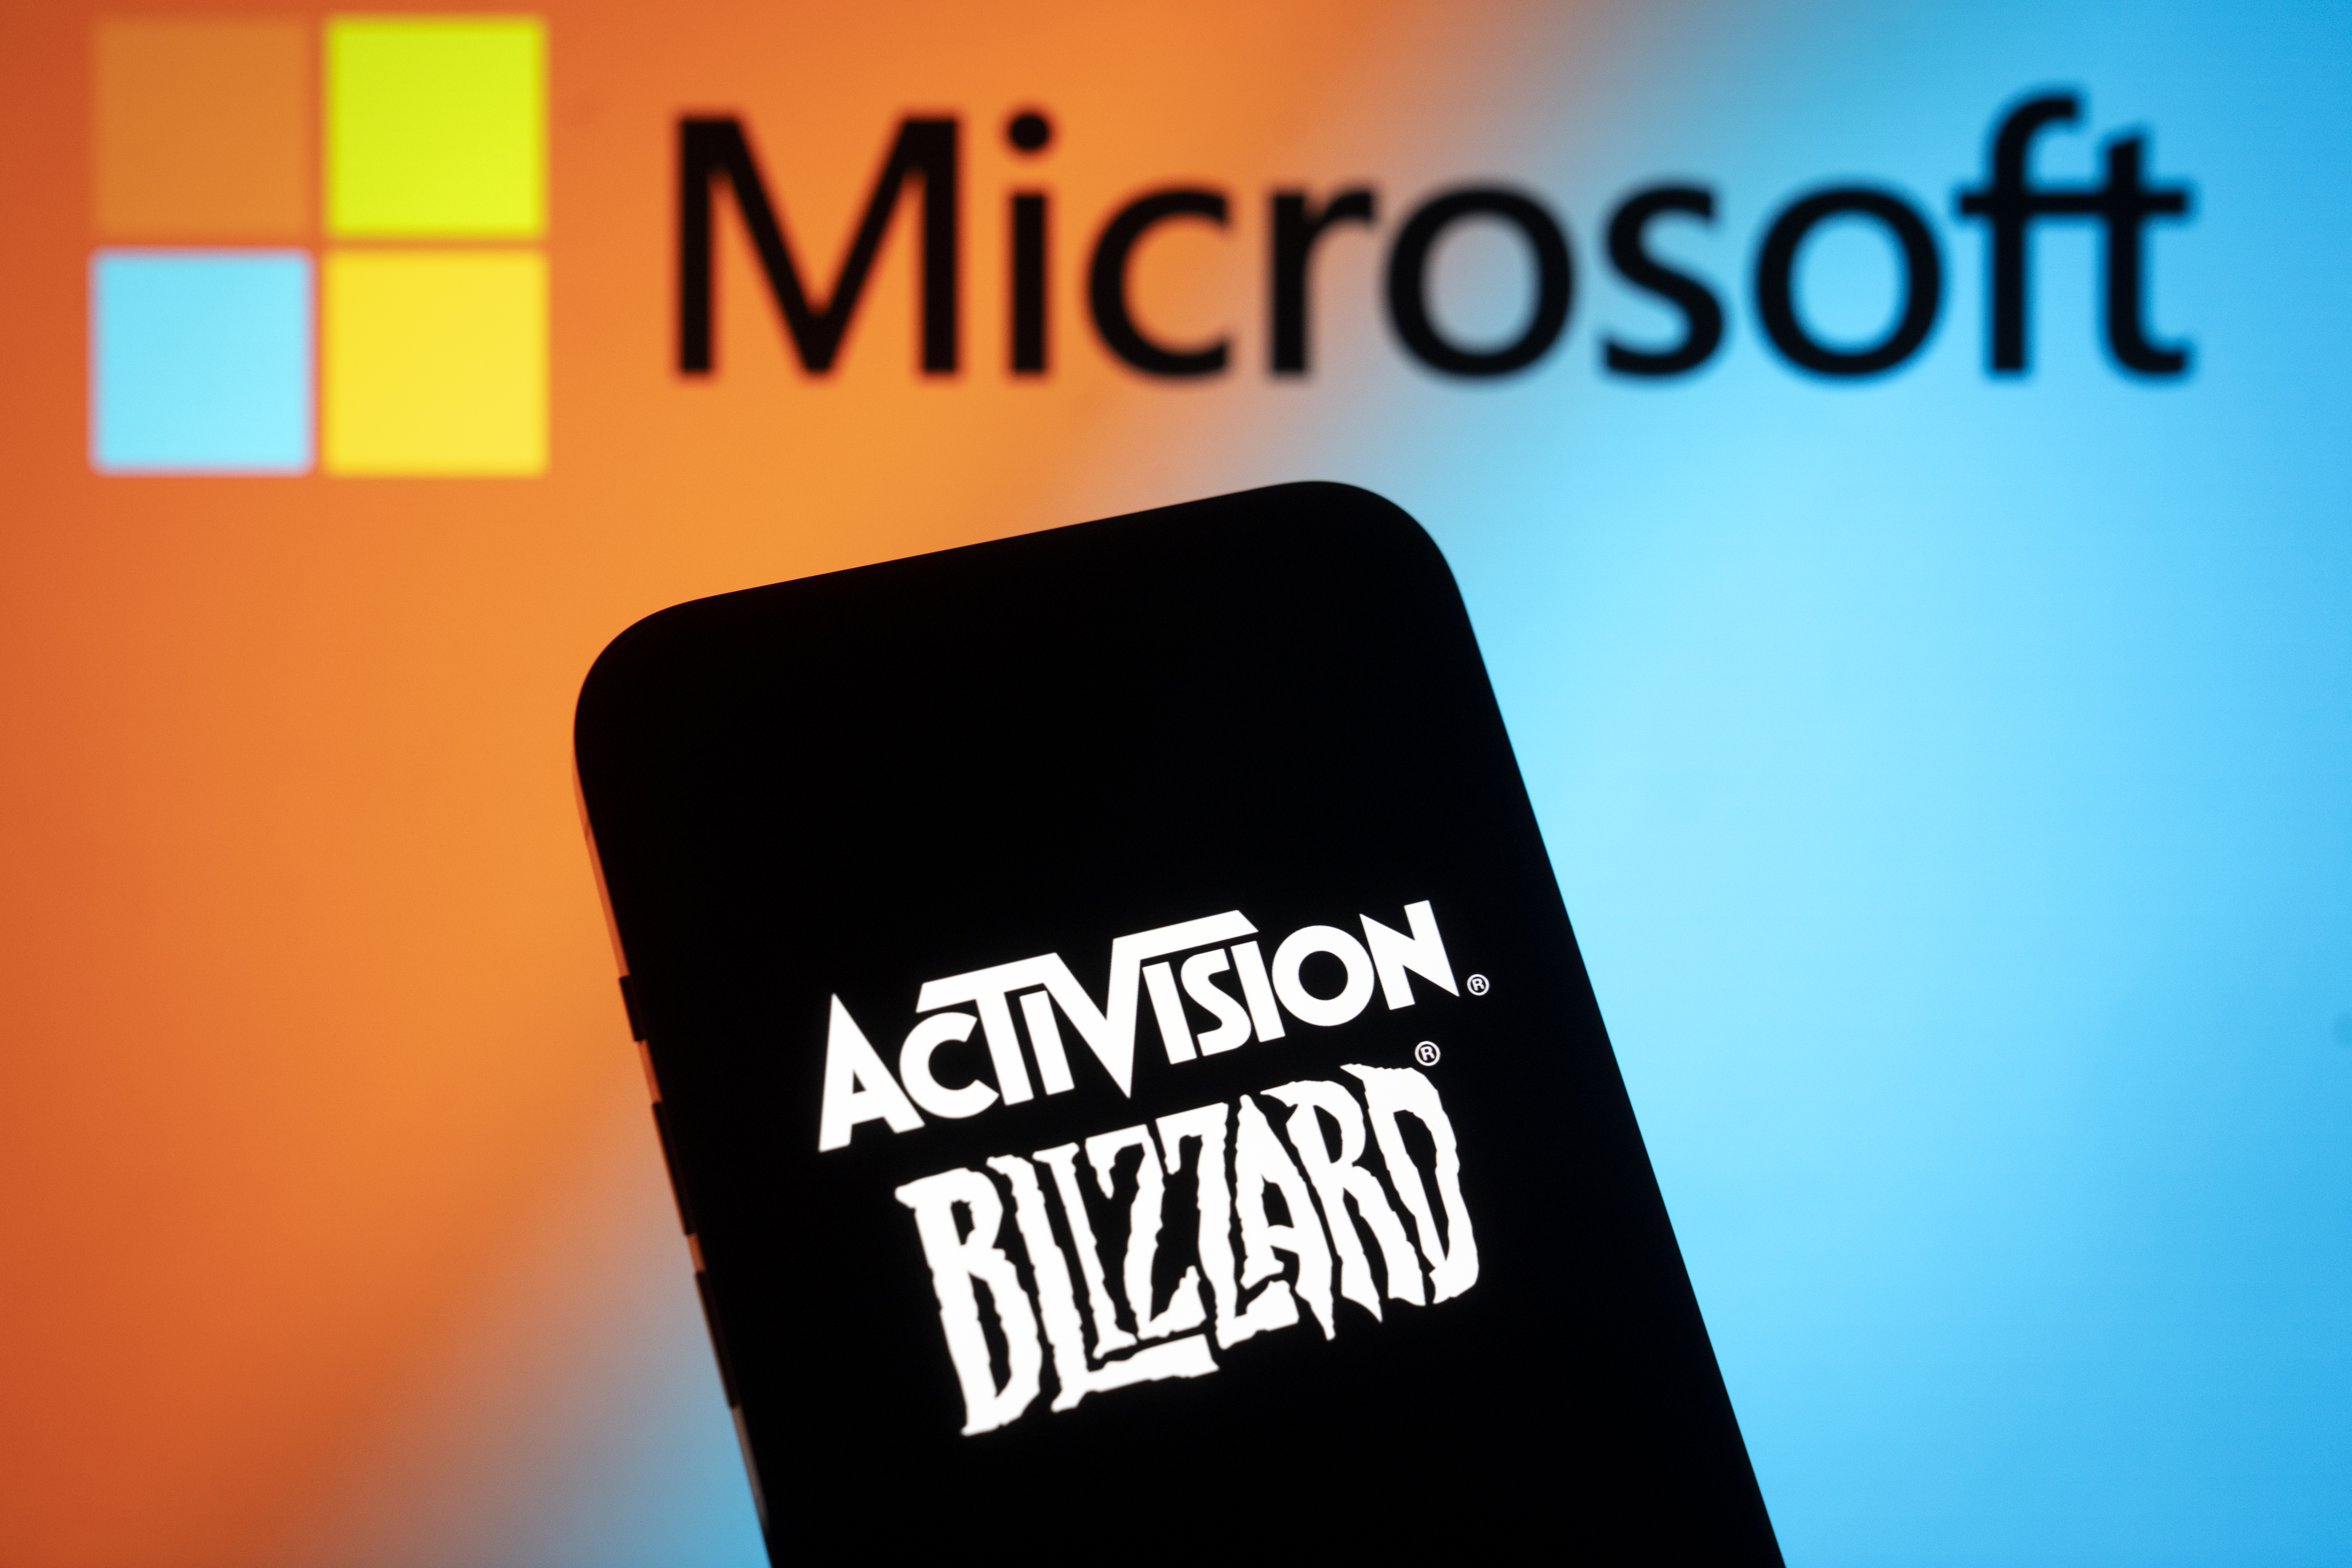 Will Microsoft's Activision Blizzard deal finally get done